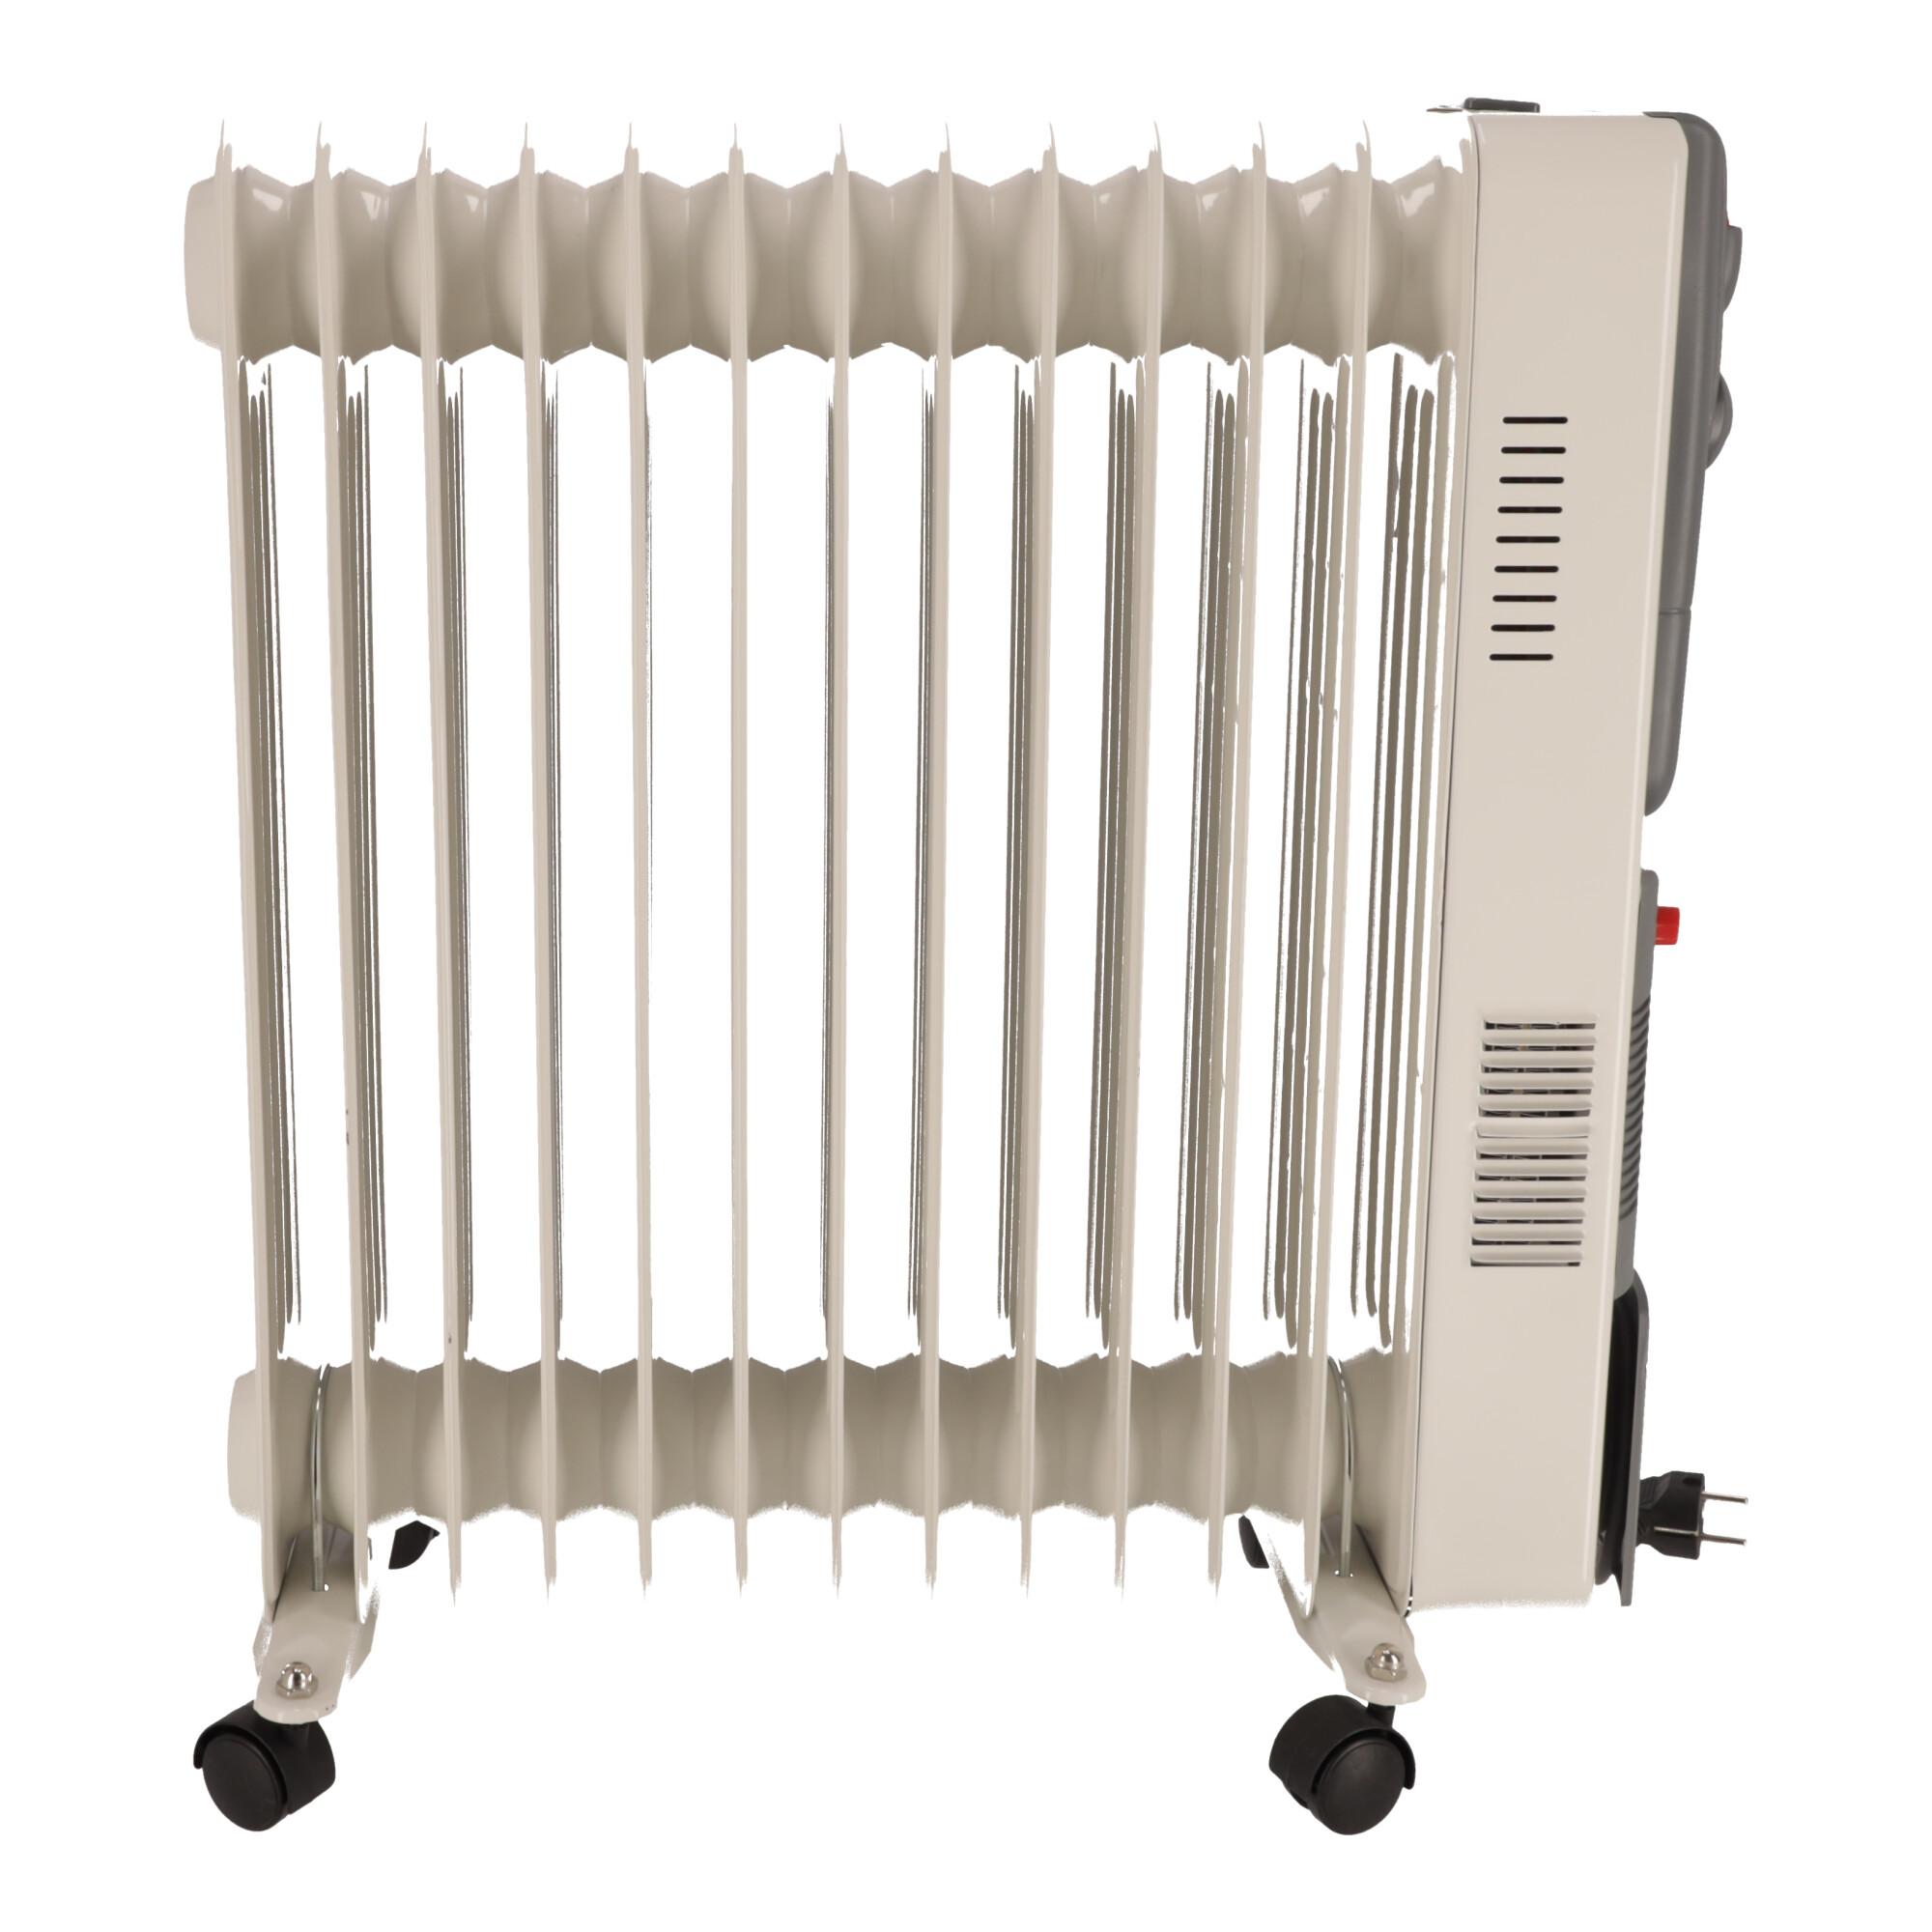 Oil fired electric heater 13 ribs